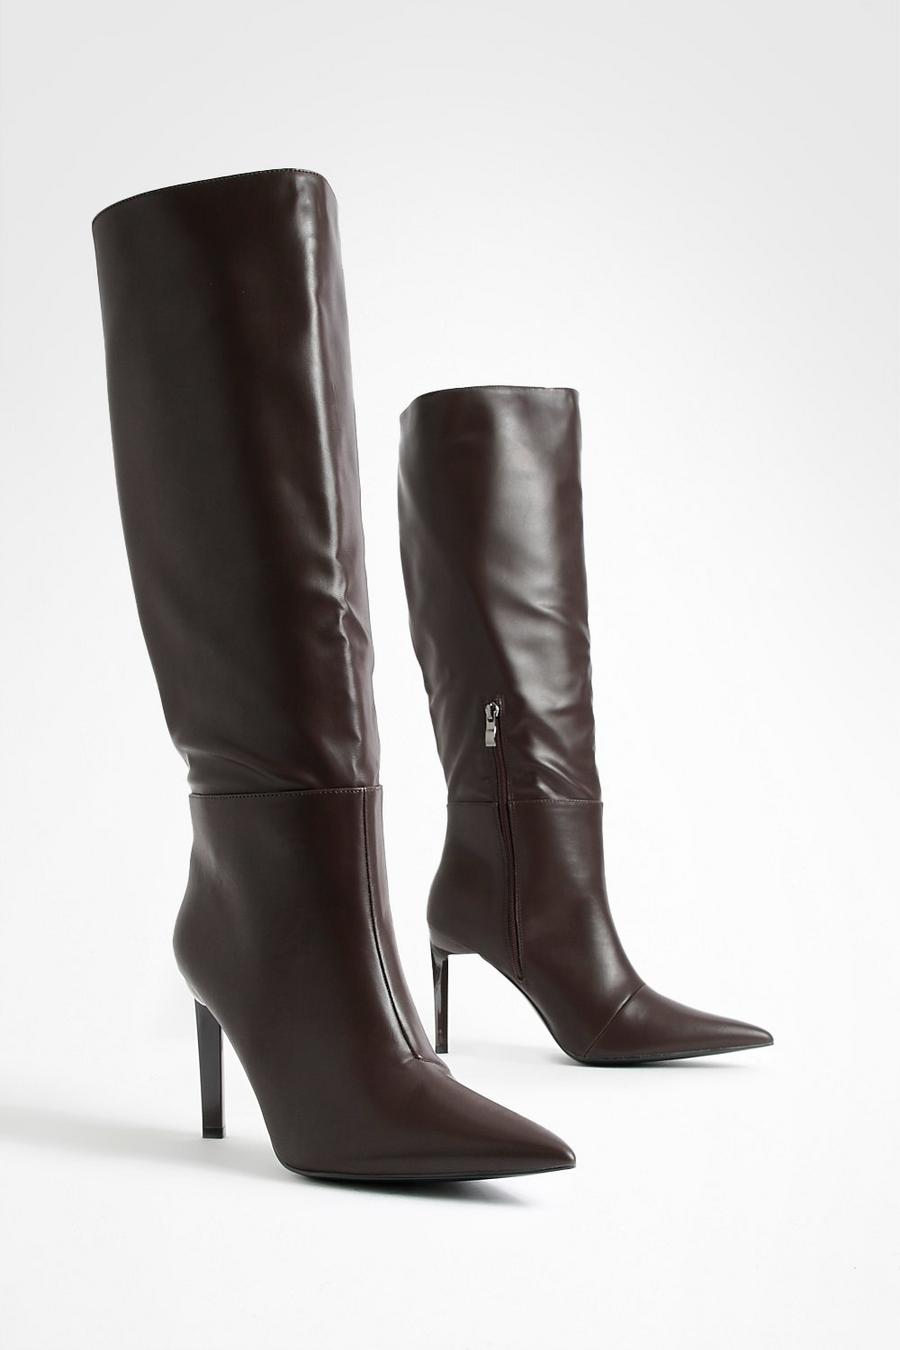 Wide Width Stiletto Mid Height Knee High Boots | boohoo